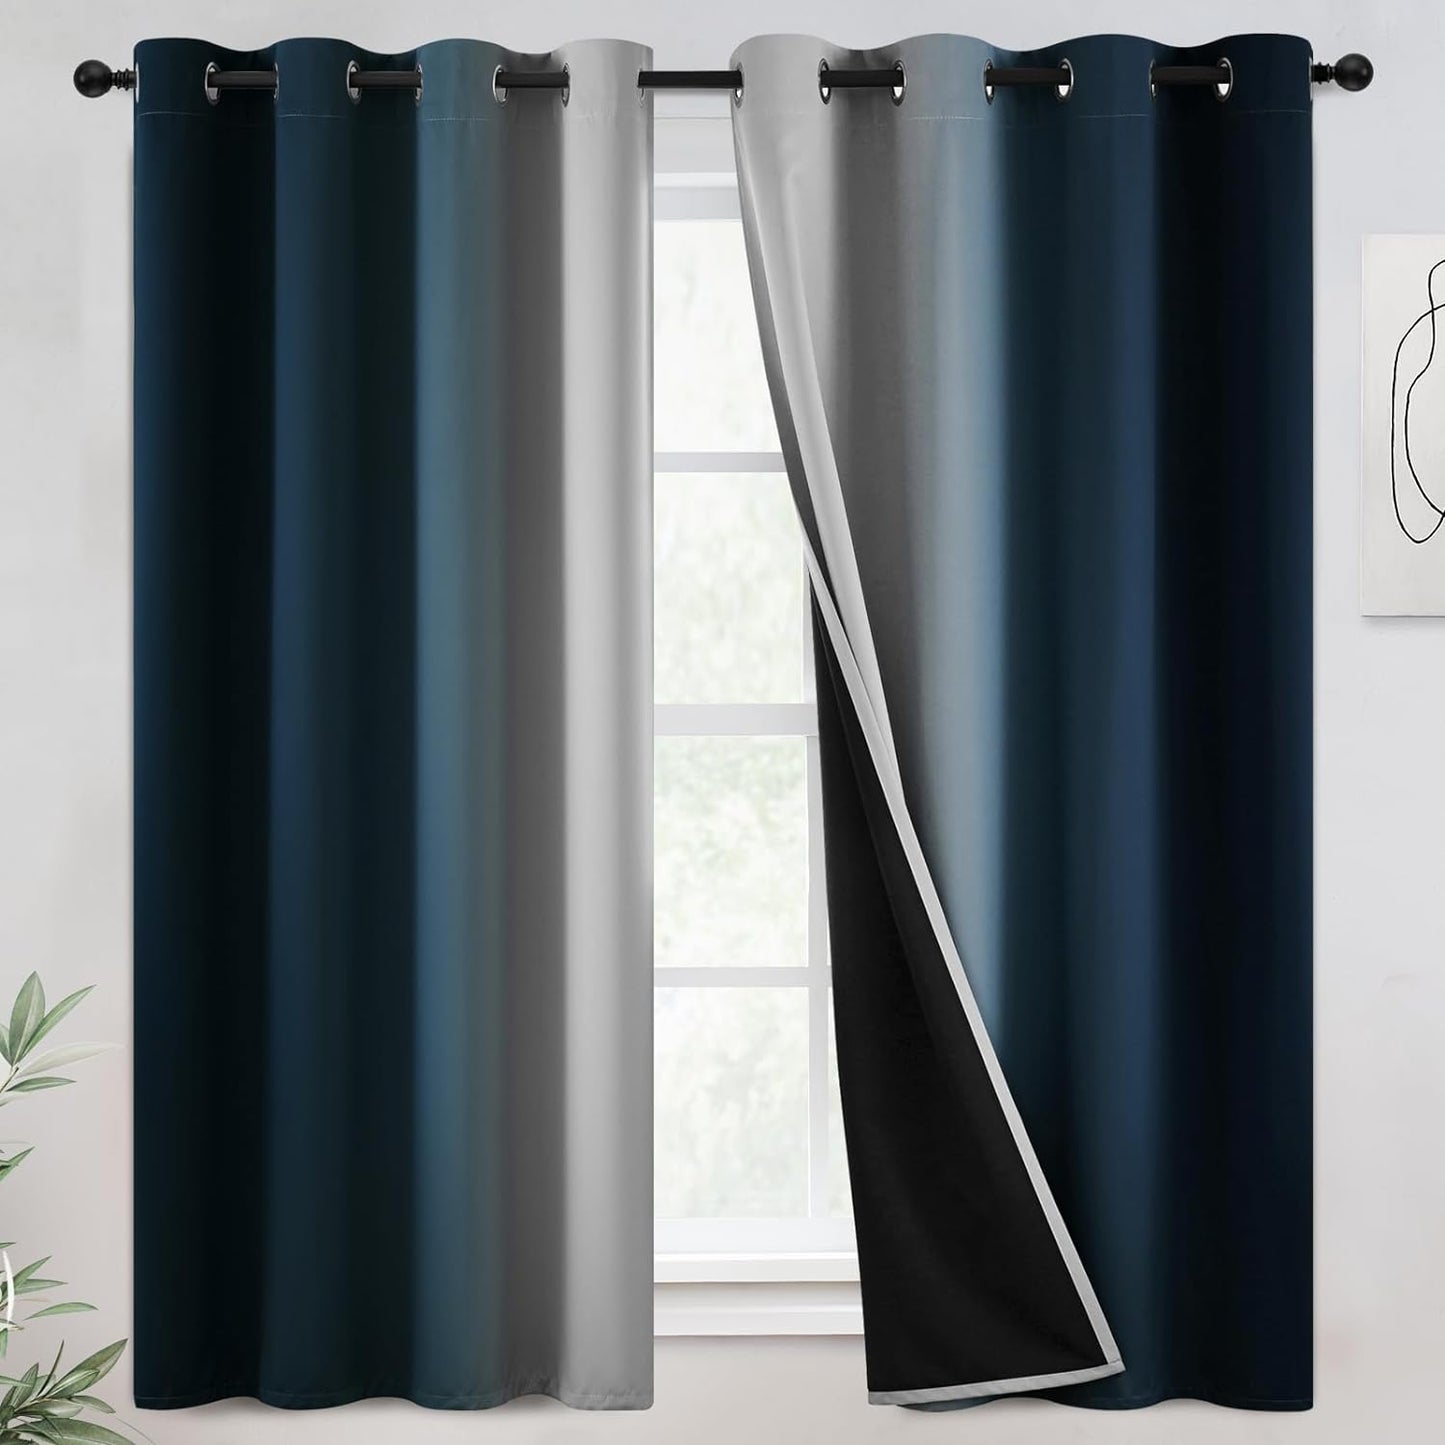 COSVIYA 100% Blackout Curtains & Drapes Ombre Purple Curtains 63 Inch Length 2 Panels,Full Room Darkening Grommet Gradient Insulated Thermal Window Curtains for Bedroom/Living Room,52X63 Inches  COSVIYA Blackout Navy To Grayish White 52W X 63L 